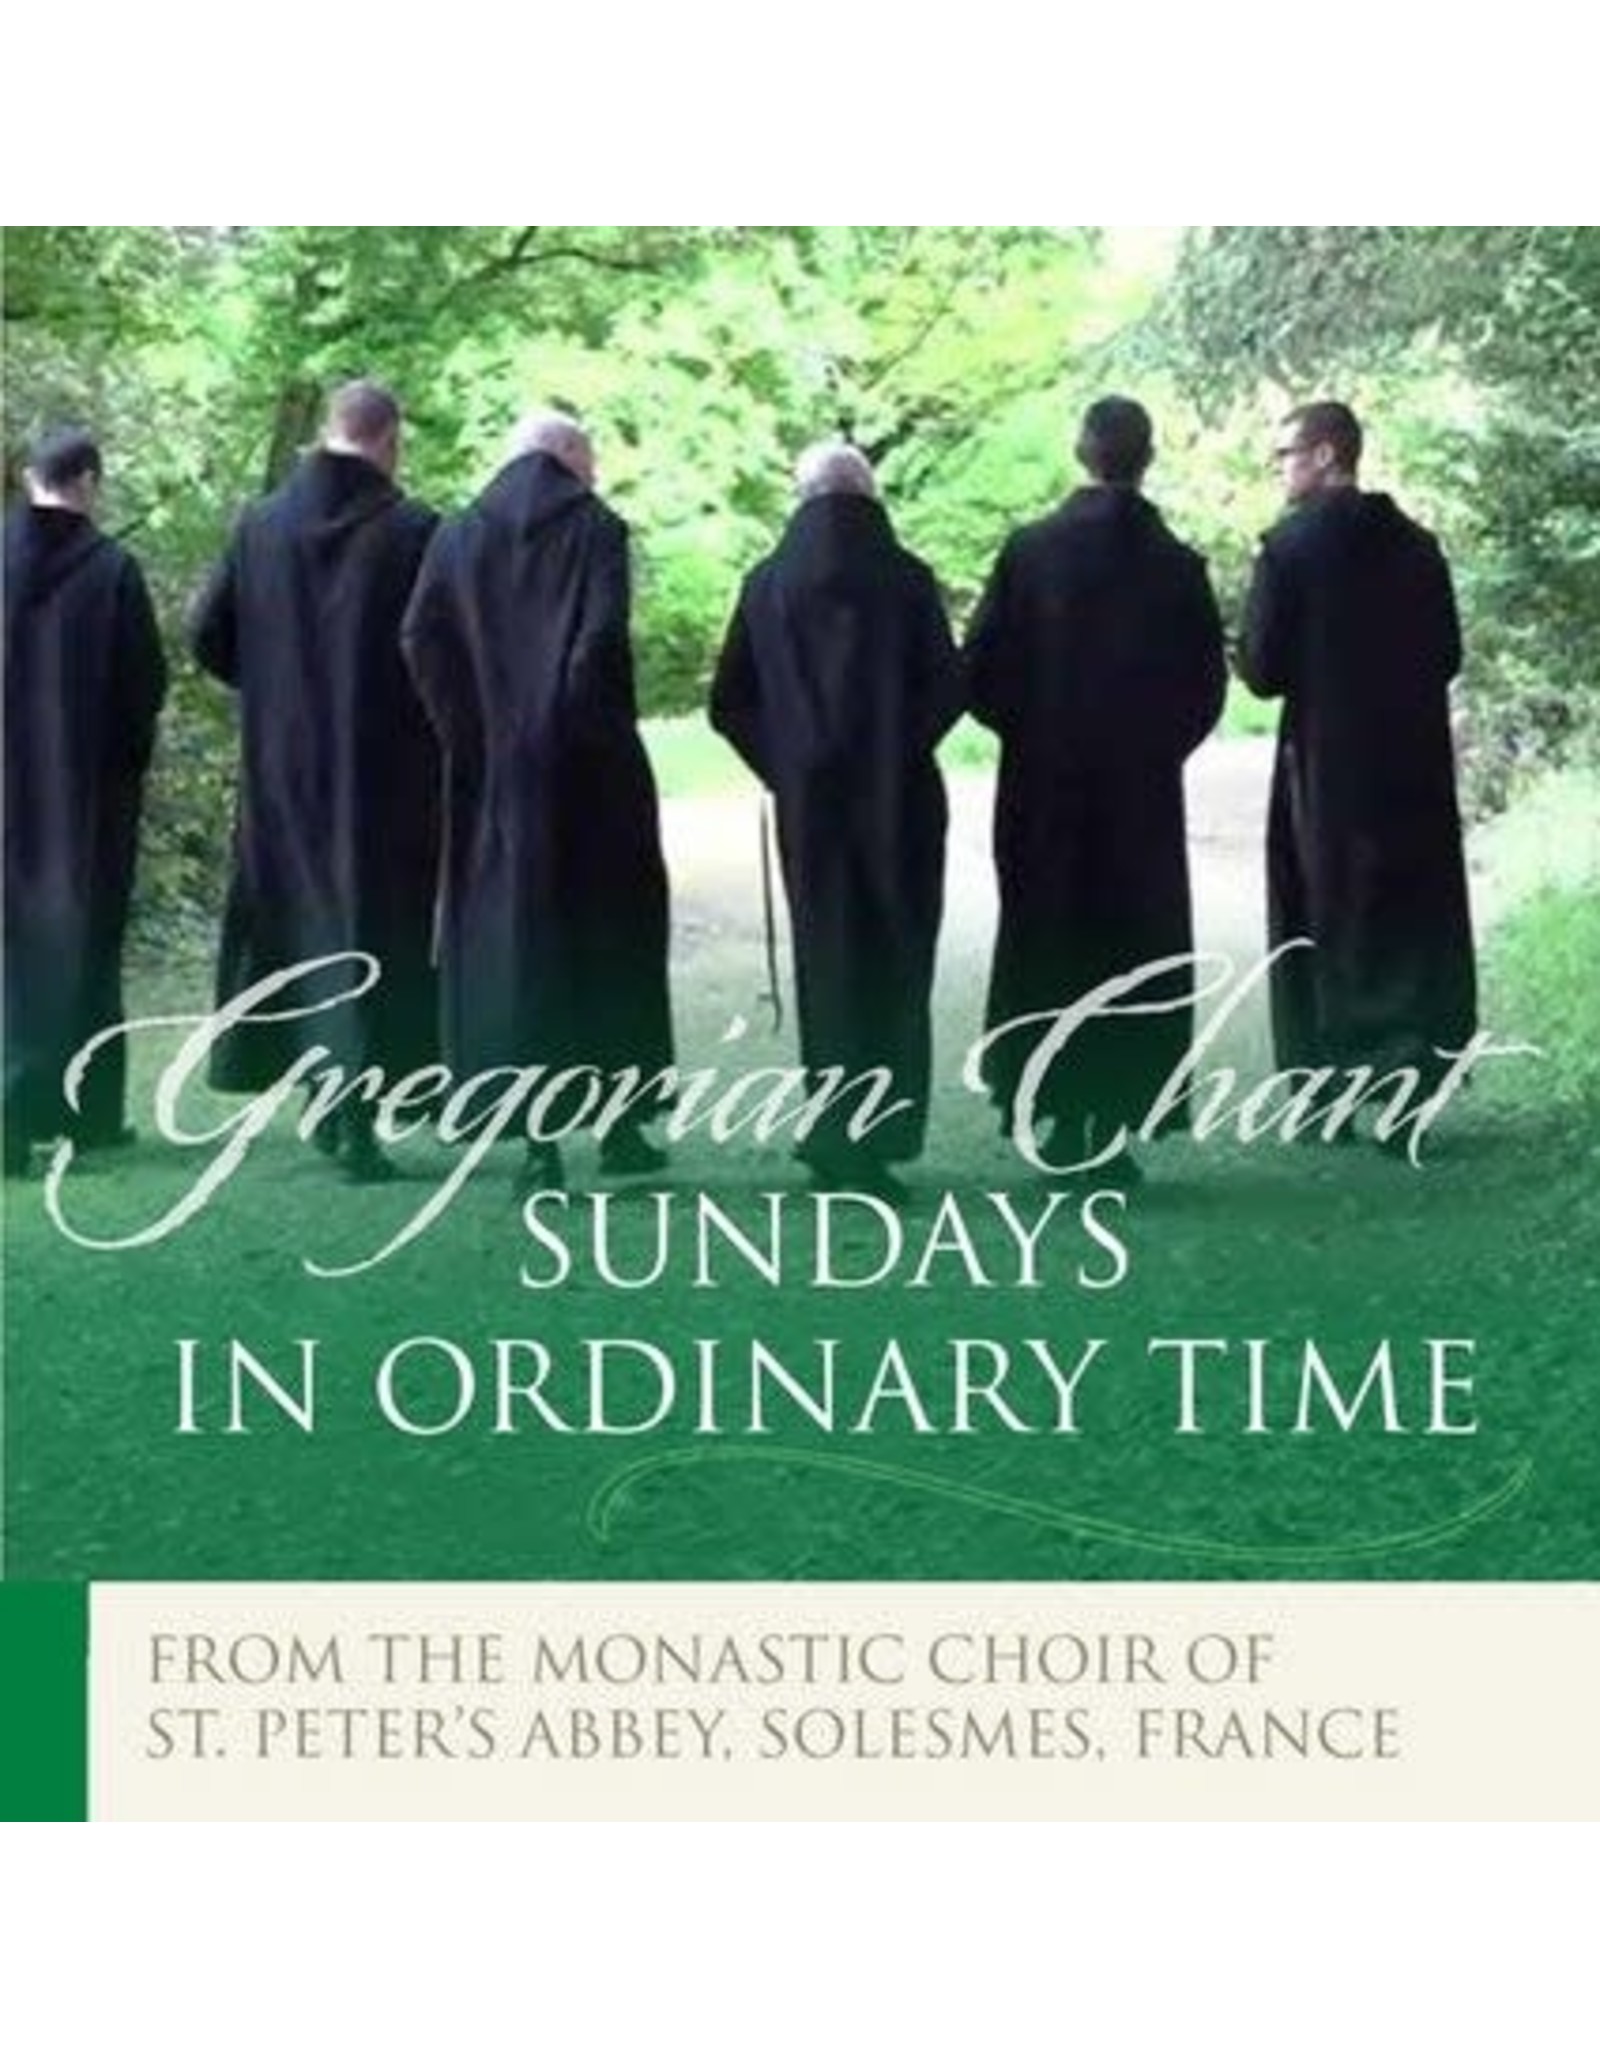 Paraclete Press Sundays in Ordinary Time: Gregorian Chant (CD)